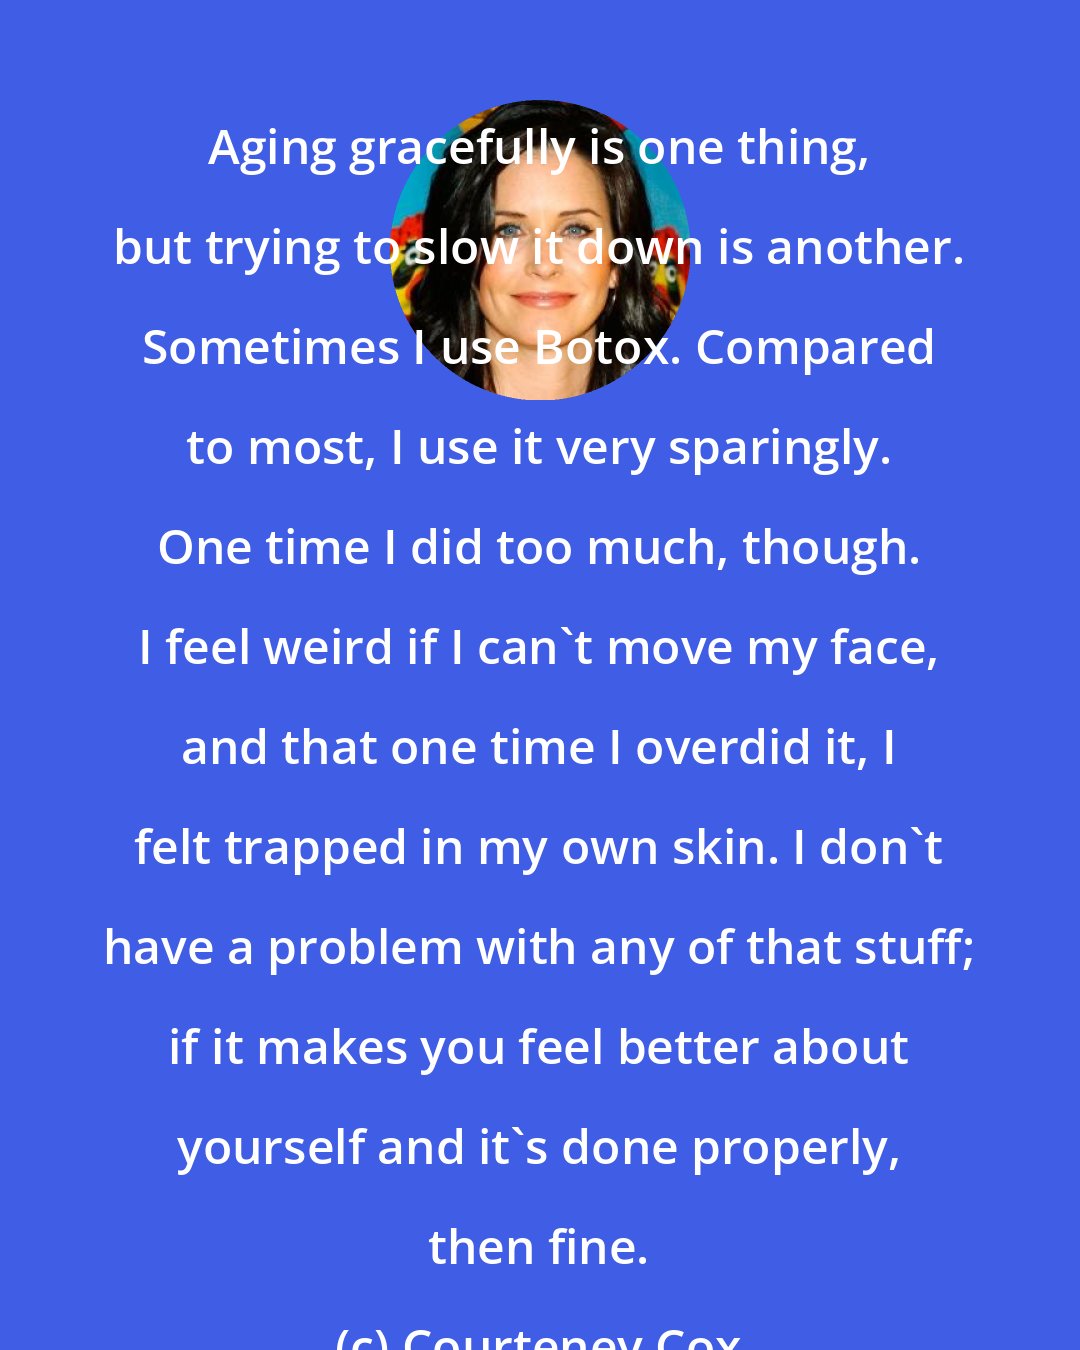 Courteney Cox: Aging gracefully is one thing, but trying to slow it down is another. Sometimes I use Botox. Compared to most, I use it very sparingly. One time I did too much, though. I feel weird if I can't move my face, and that one time I overdid it, I felt trapped in my own skin. I don't have a problem with any of that stuff; if it makes you feel better about yourself and it's done properly, then fine.